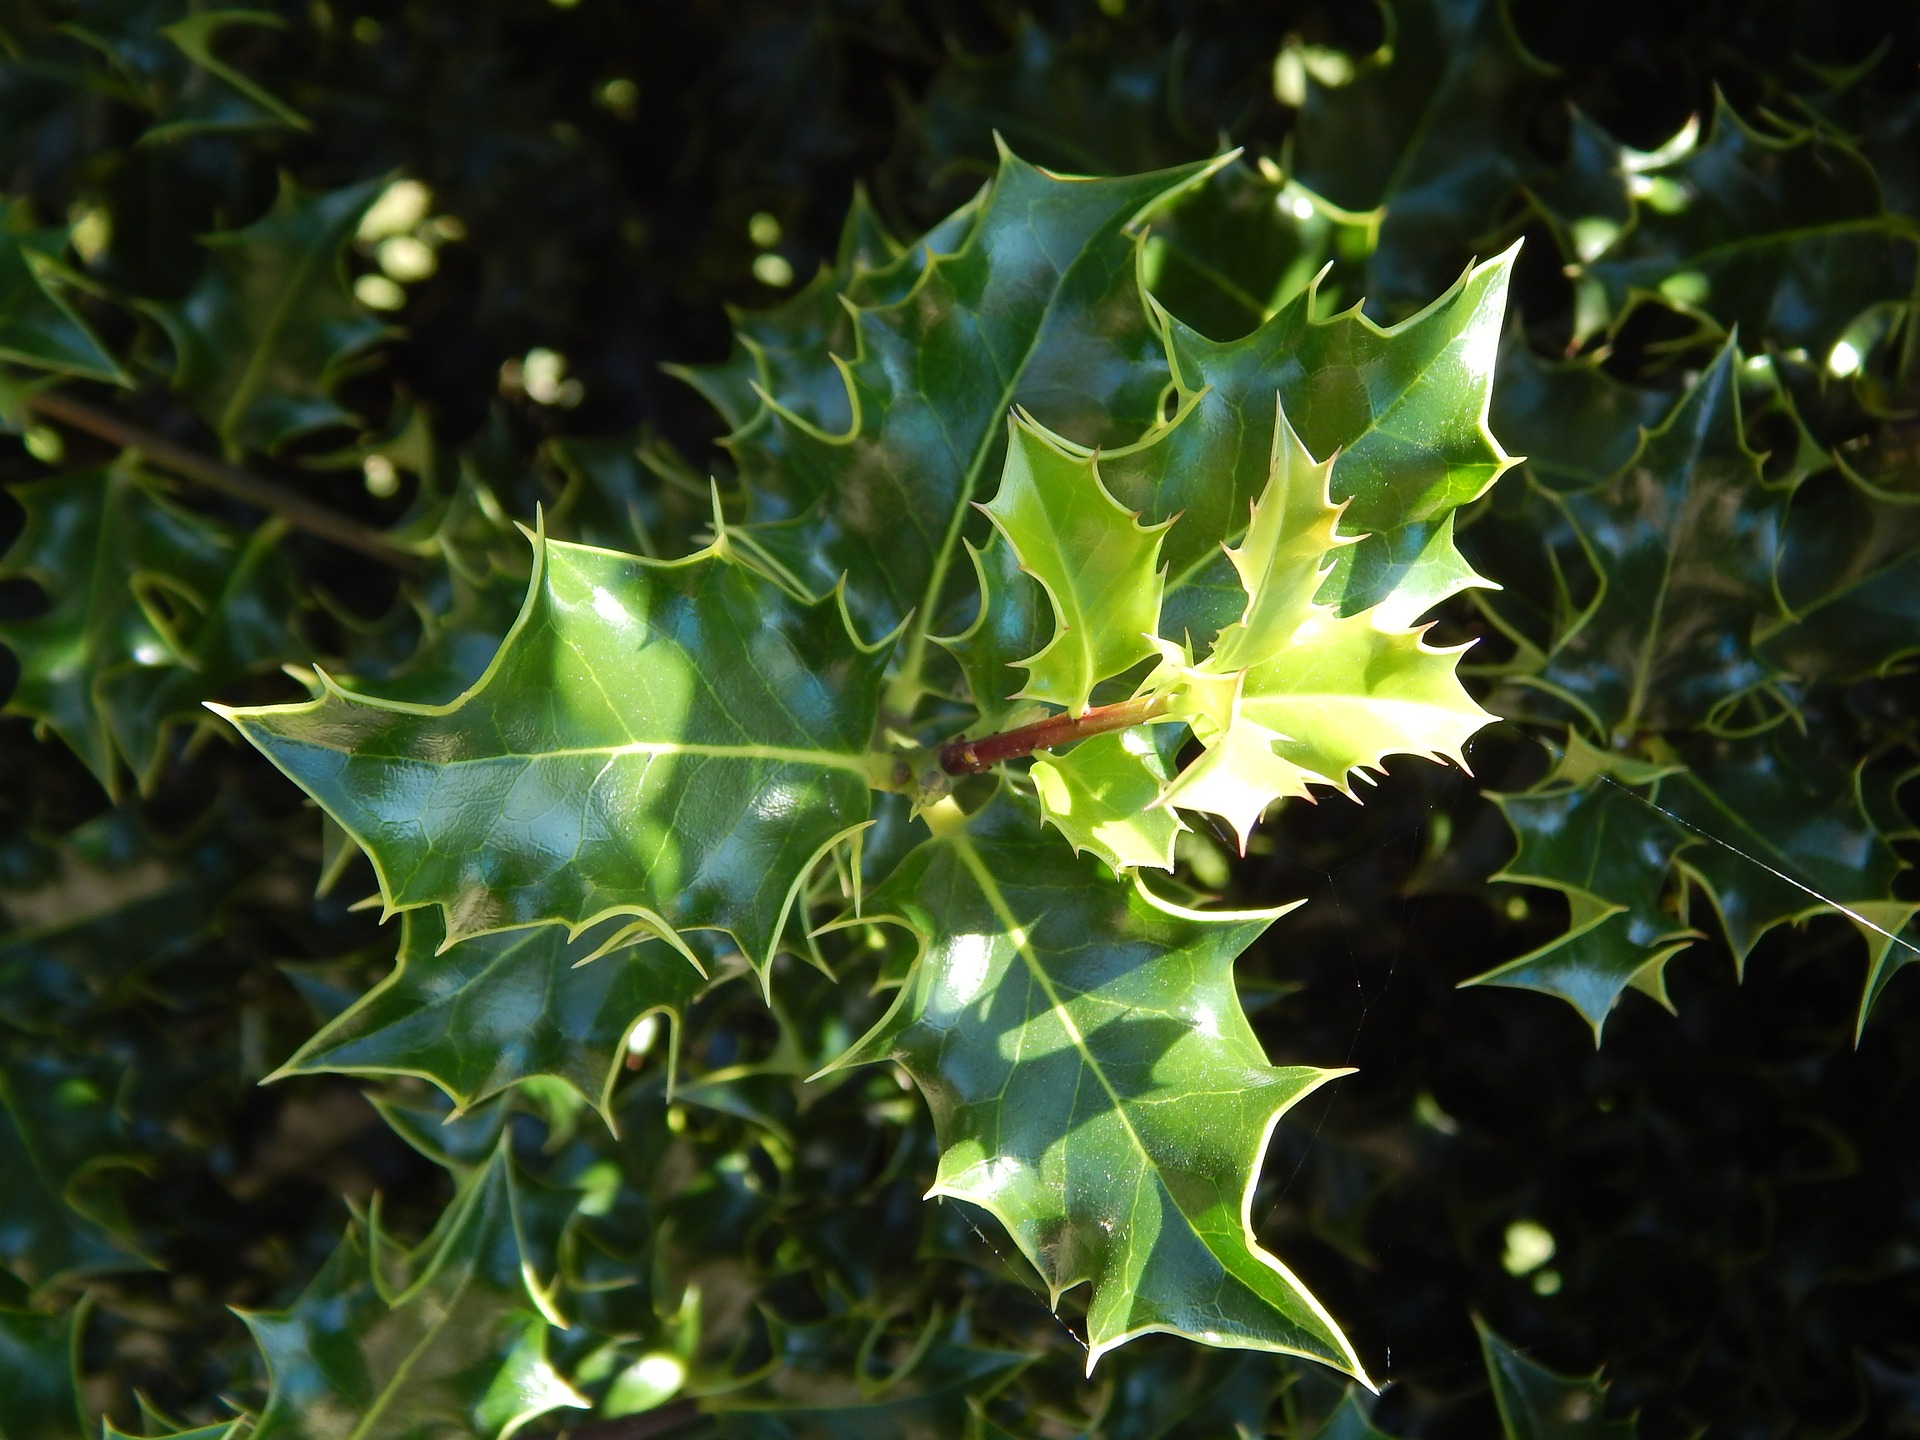 Exploring the herbal uses of holly in global traditions